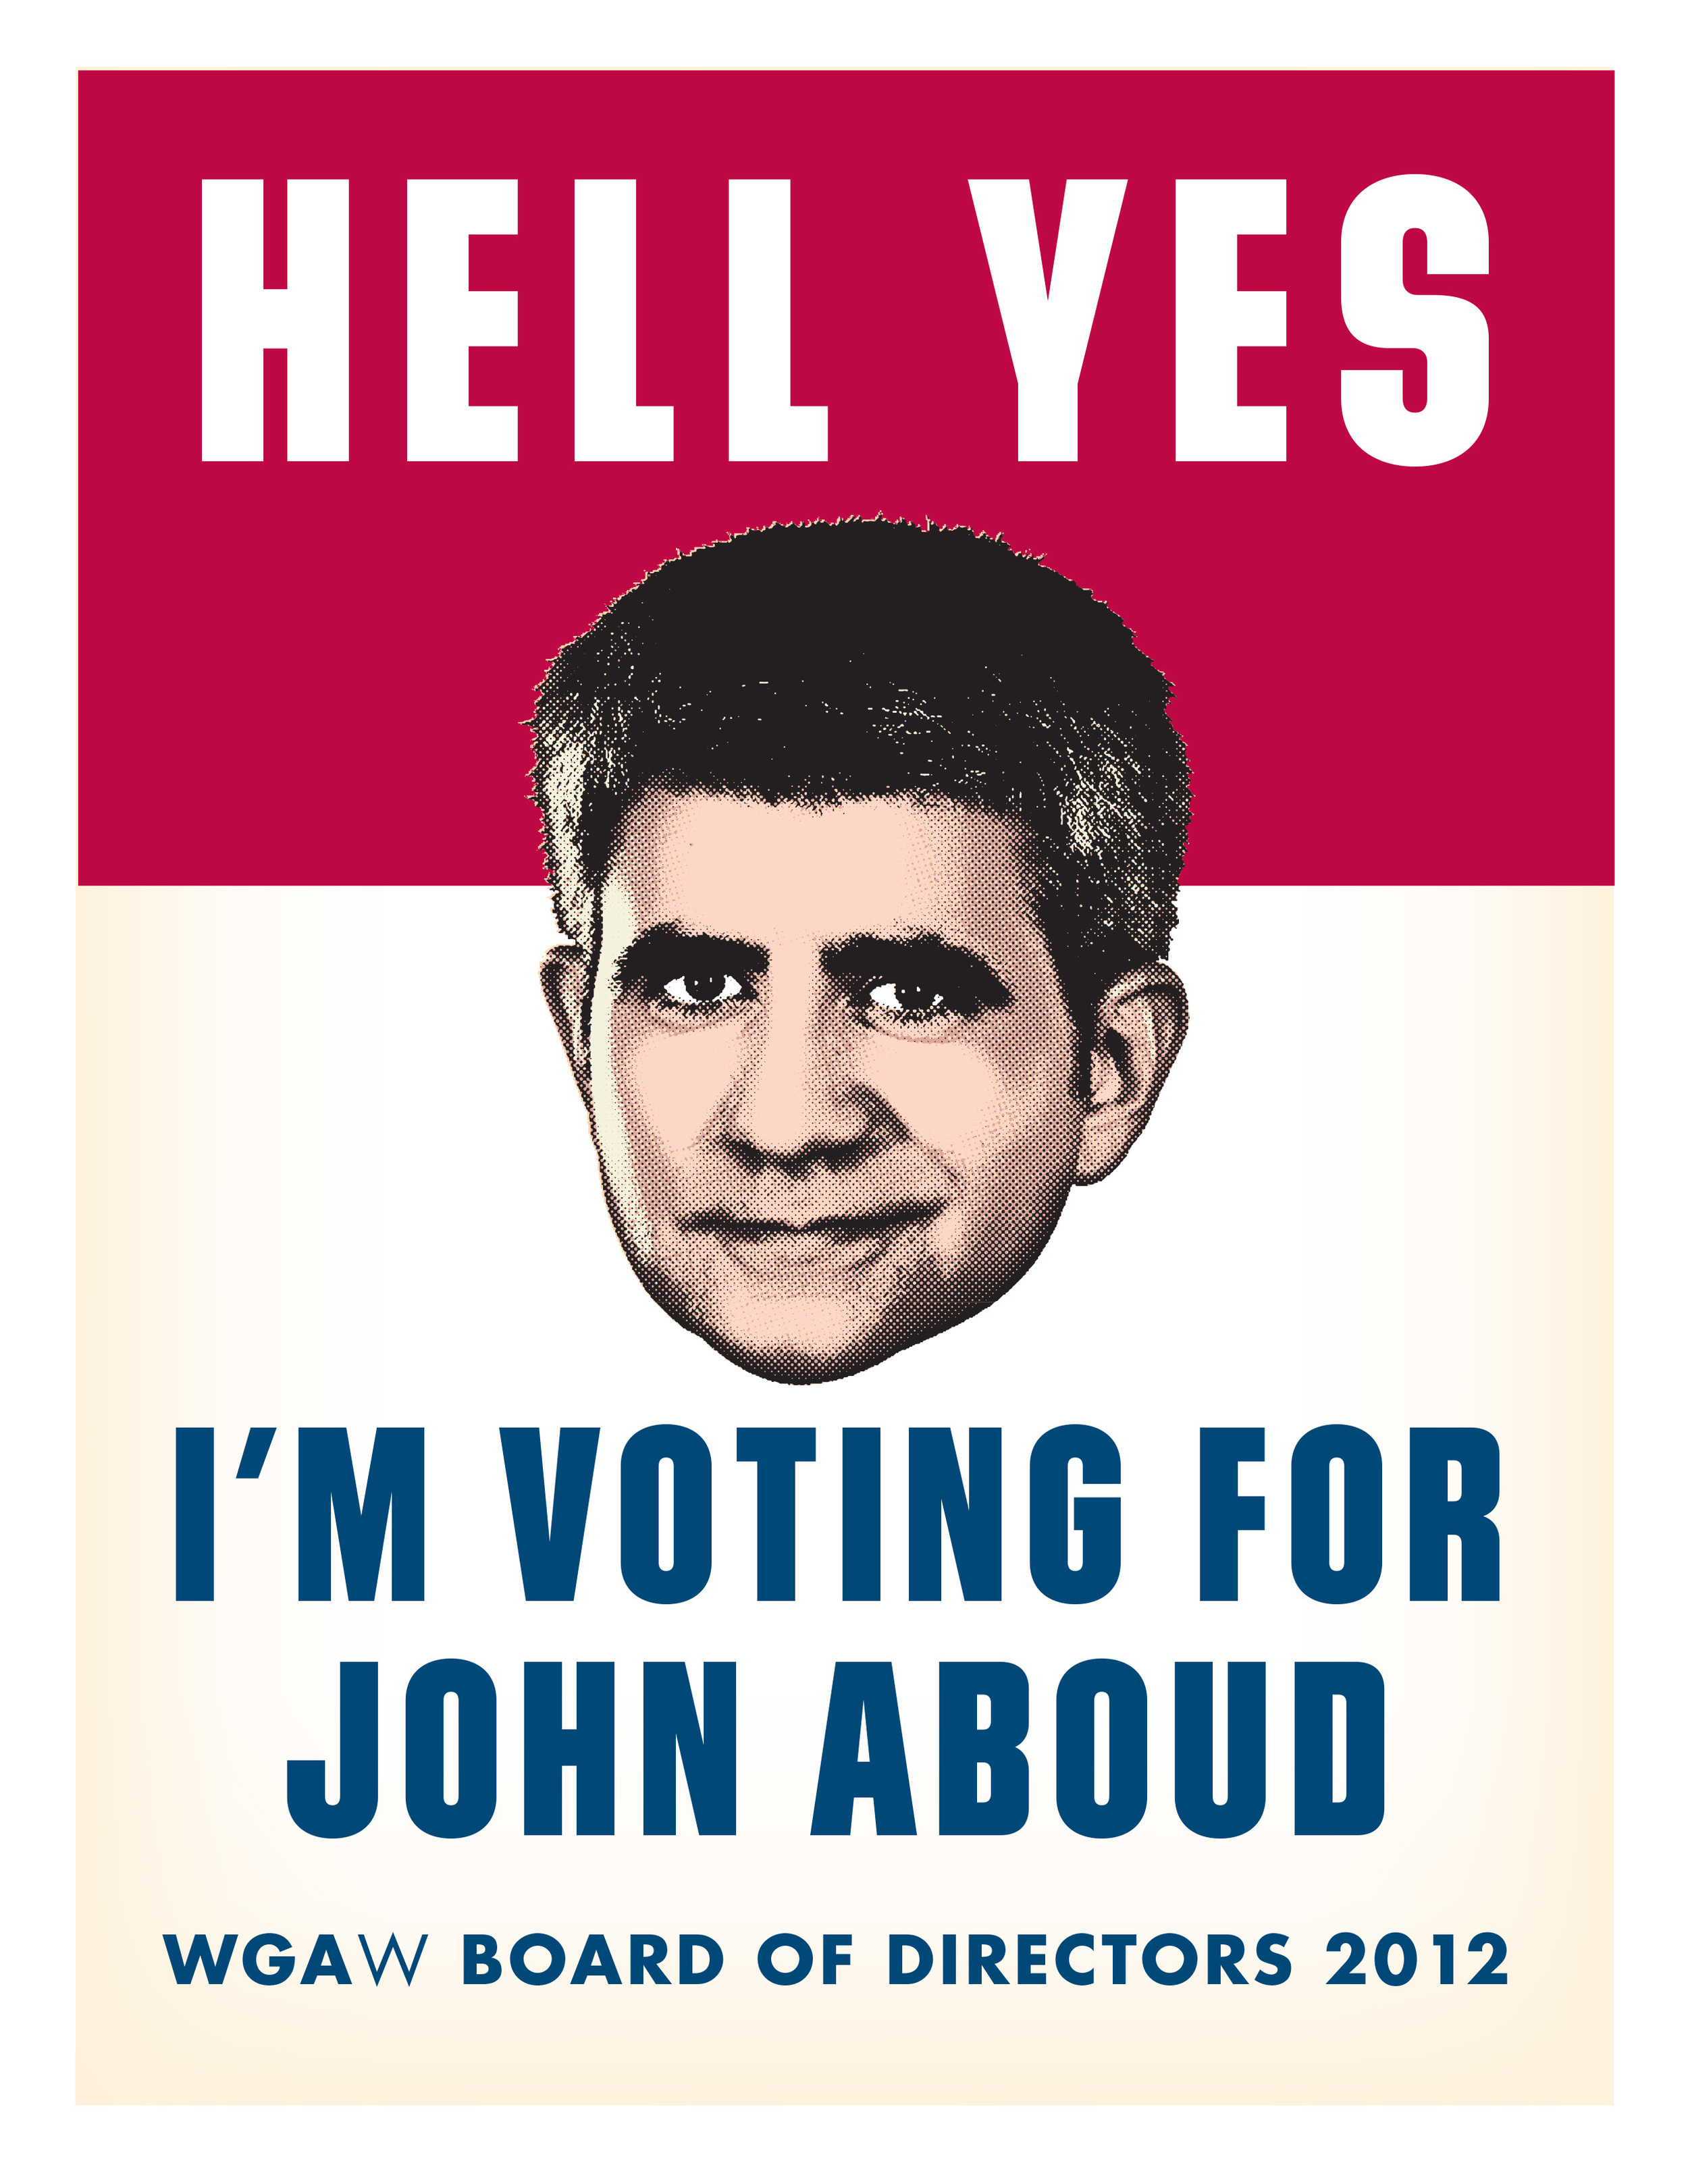 John Aboud campaign poster